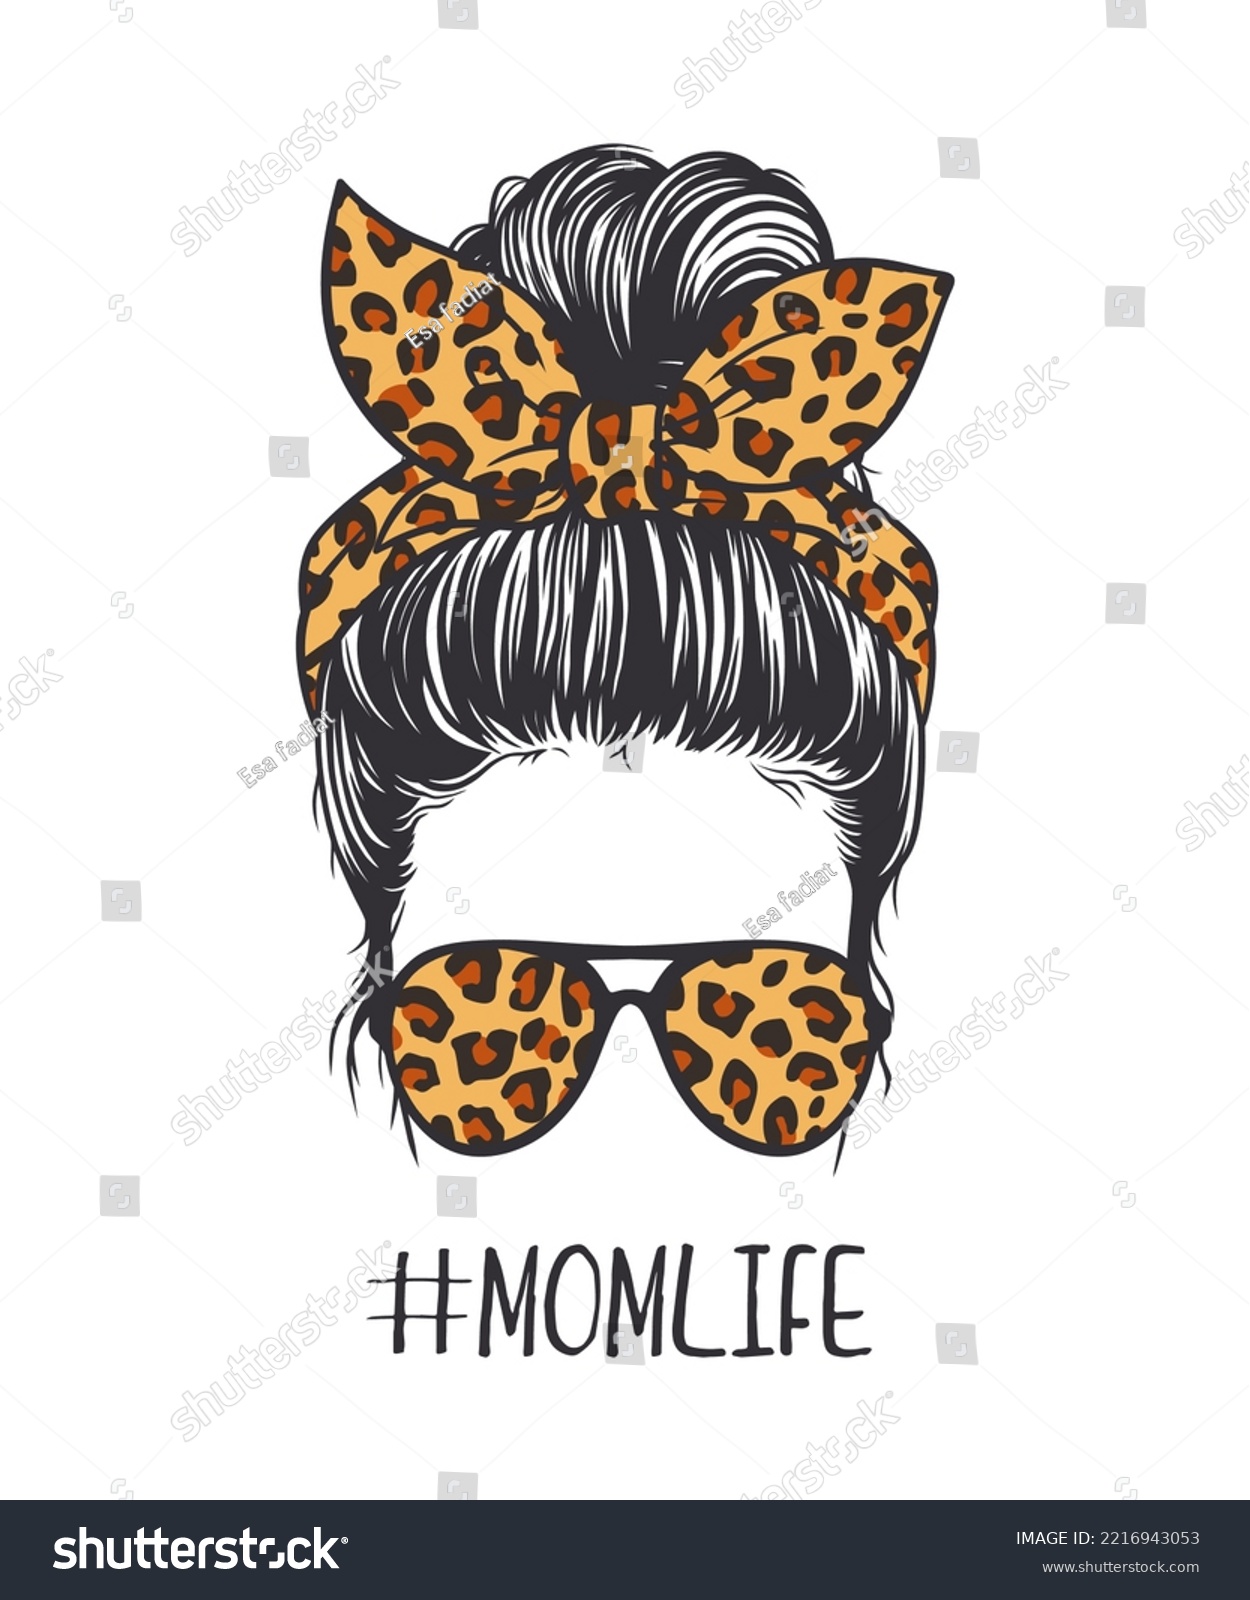 SVG of Beautiful woman with messy bun hairstyle, wearing leopard-patterned glasses and ribbon svg